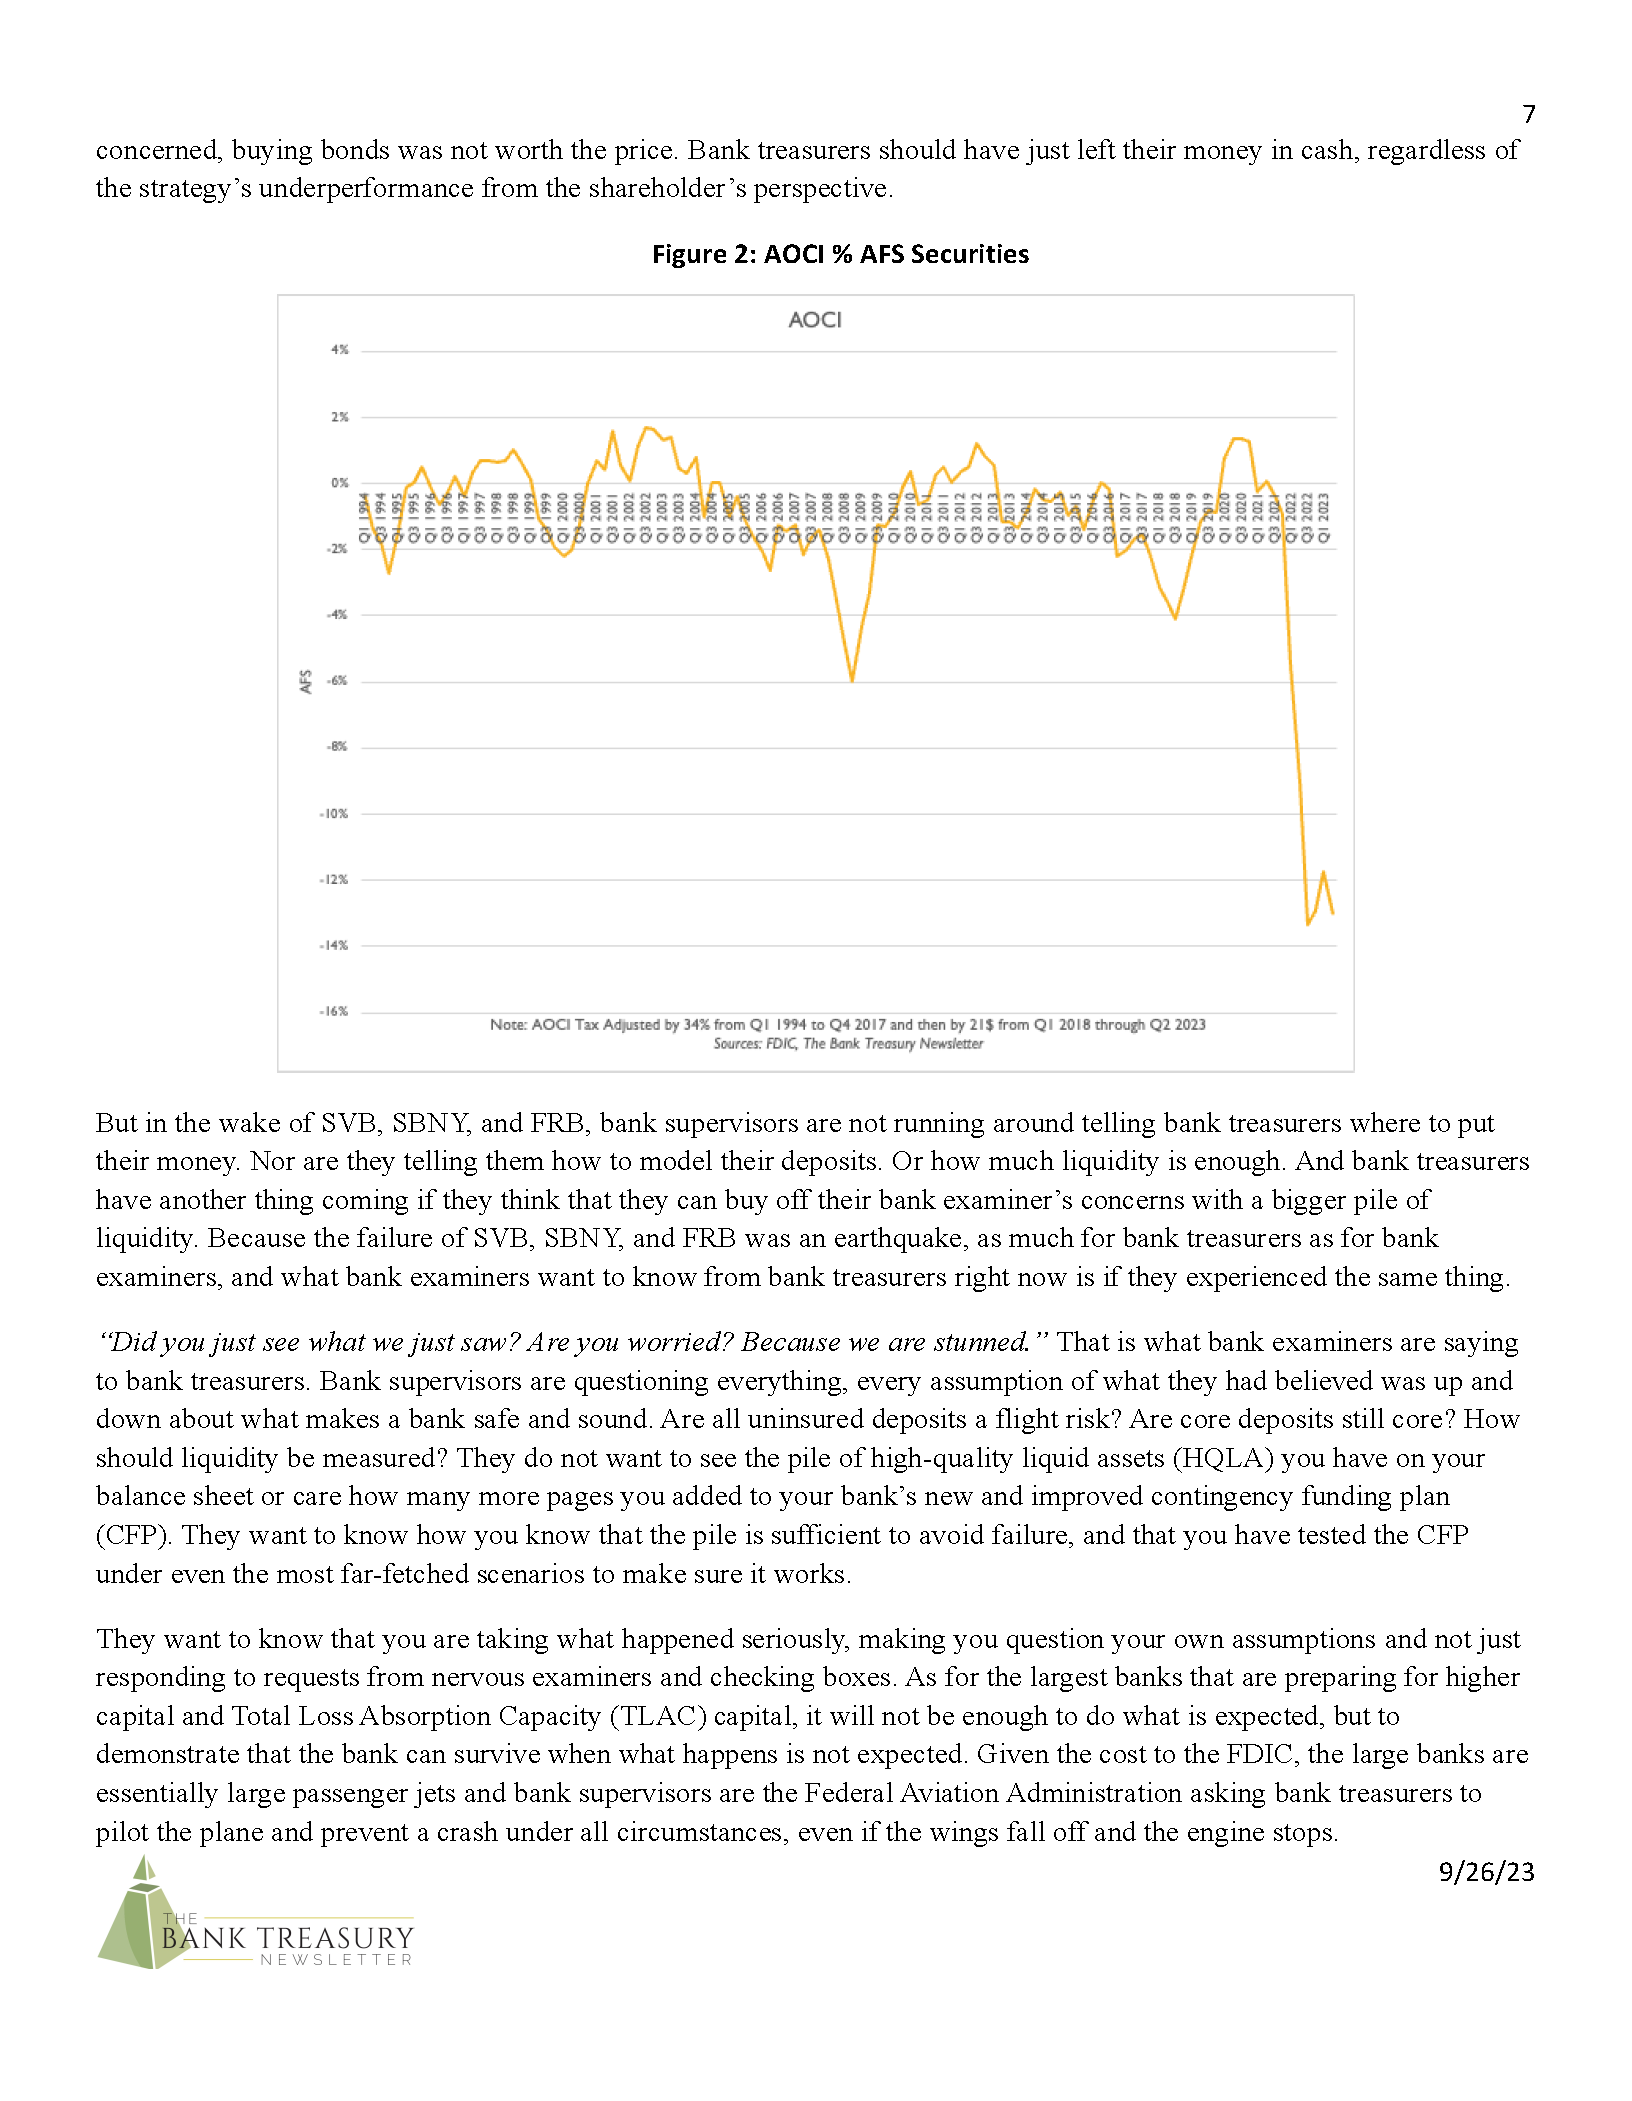 The+Bank+Treasury+Newsletter+September+2023[77]_Page_07.png